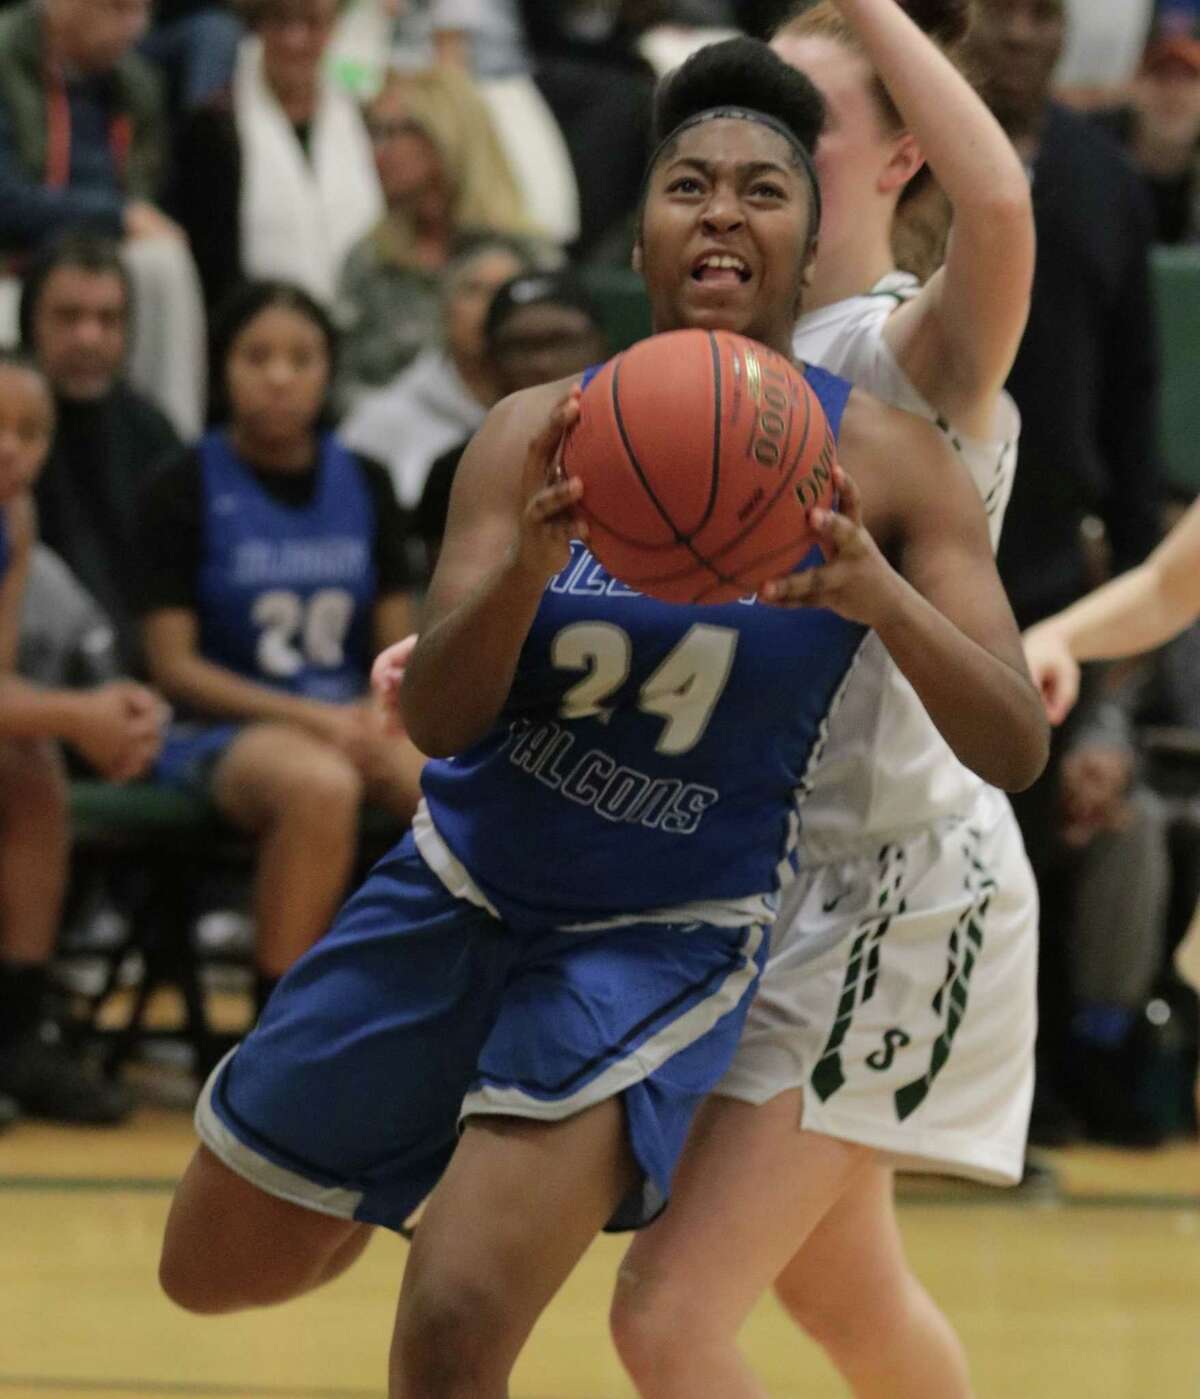 Albany's Ahniysha Jackson takes aim after driving past Shen's Jillian Huerter during the girls' basketball matchup at Shenendehowa High School Friday, January 18, 2019. (Ed Burke photo-Special to the Times Union)